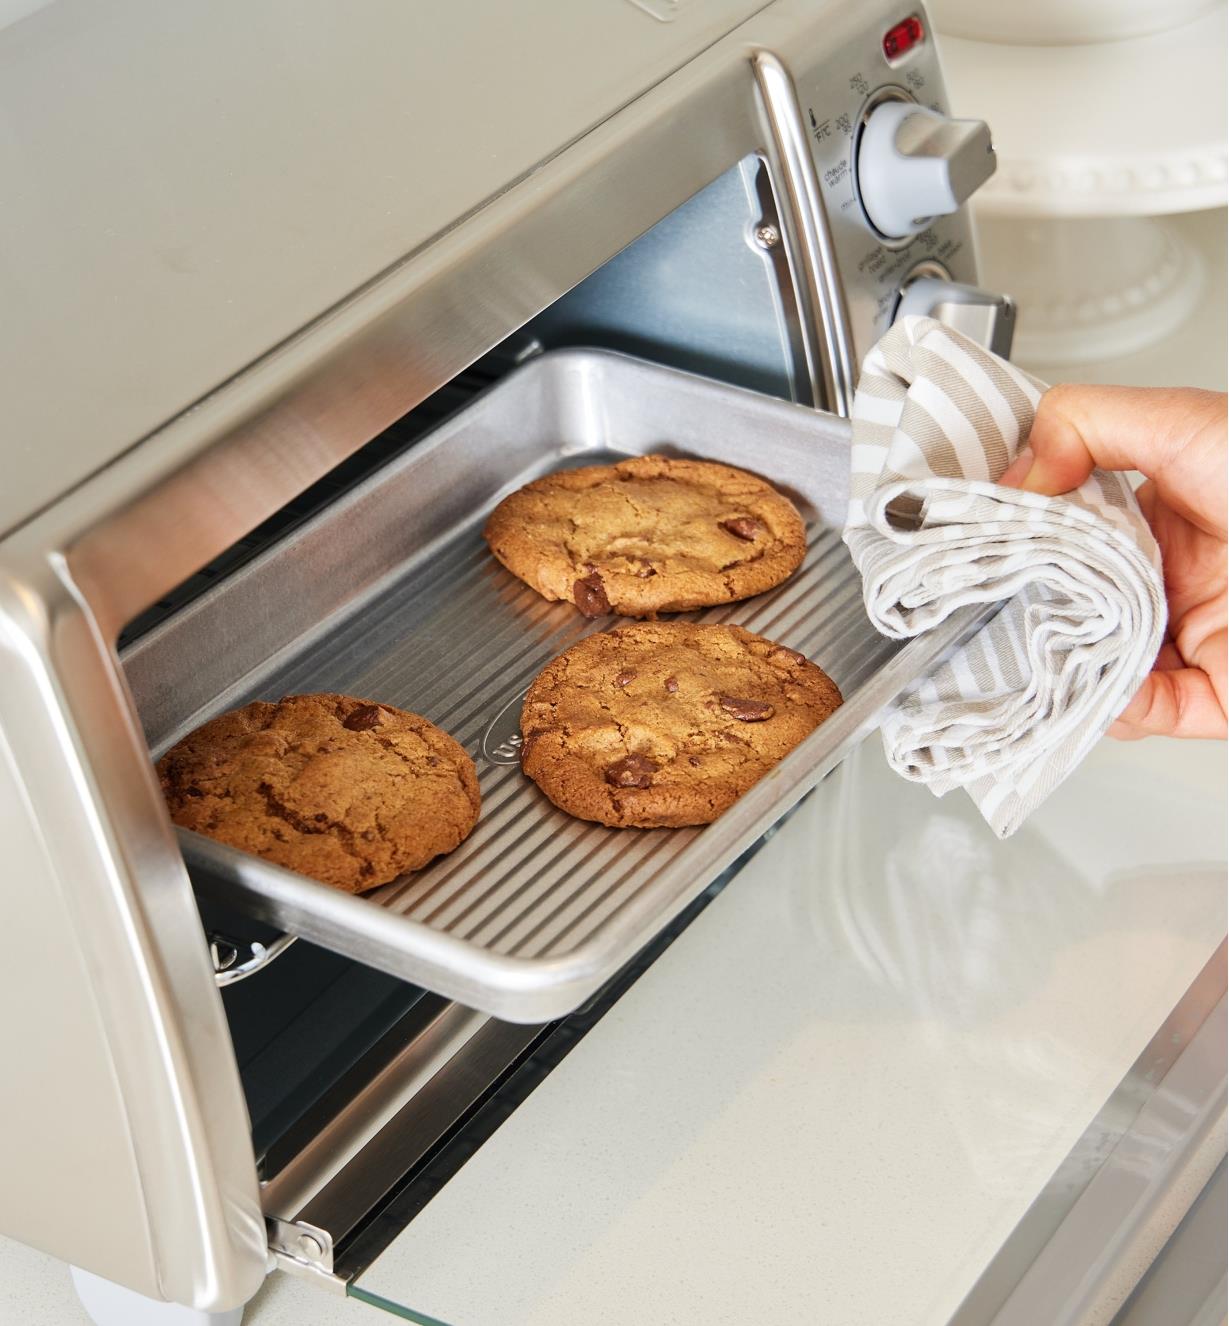 A small batch of cookies baked on an eighth-sheet baking pan being removed from a toaster oven